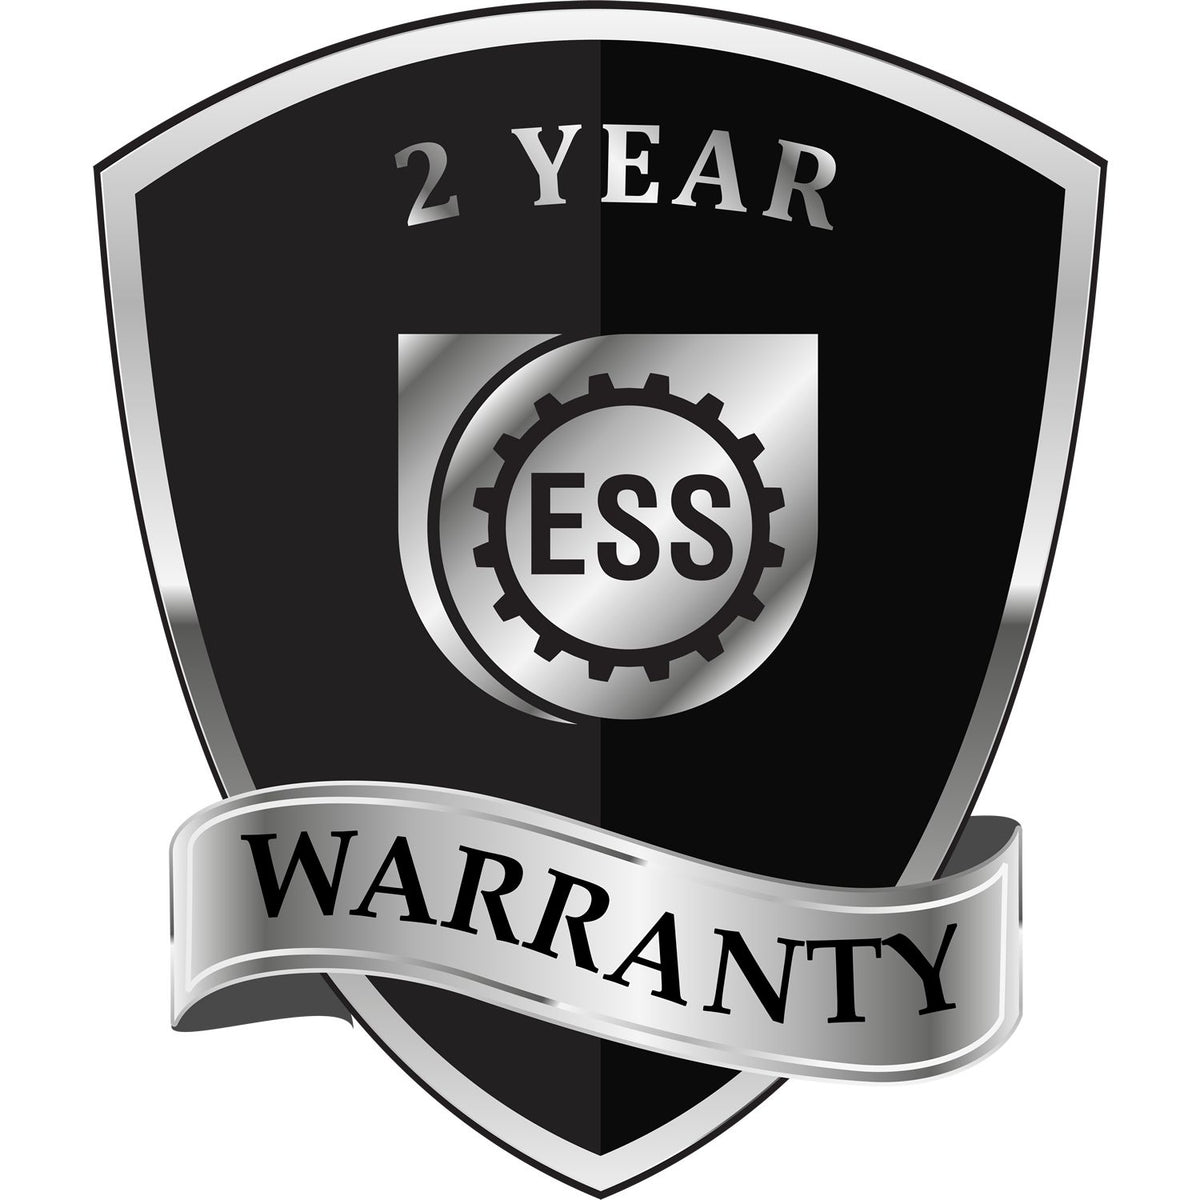 A black and silver badge or emblem showing warranty information for the Hybrid Tennessee Land Surveyor Seal